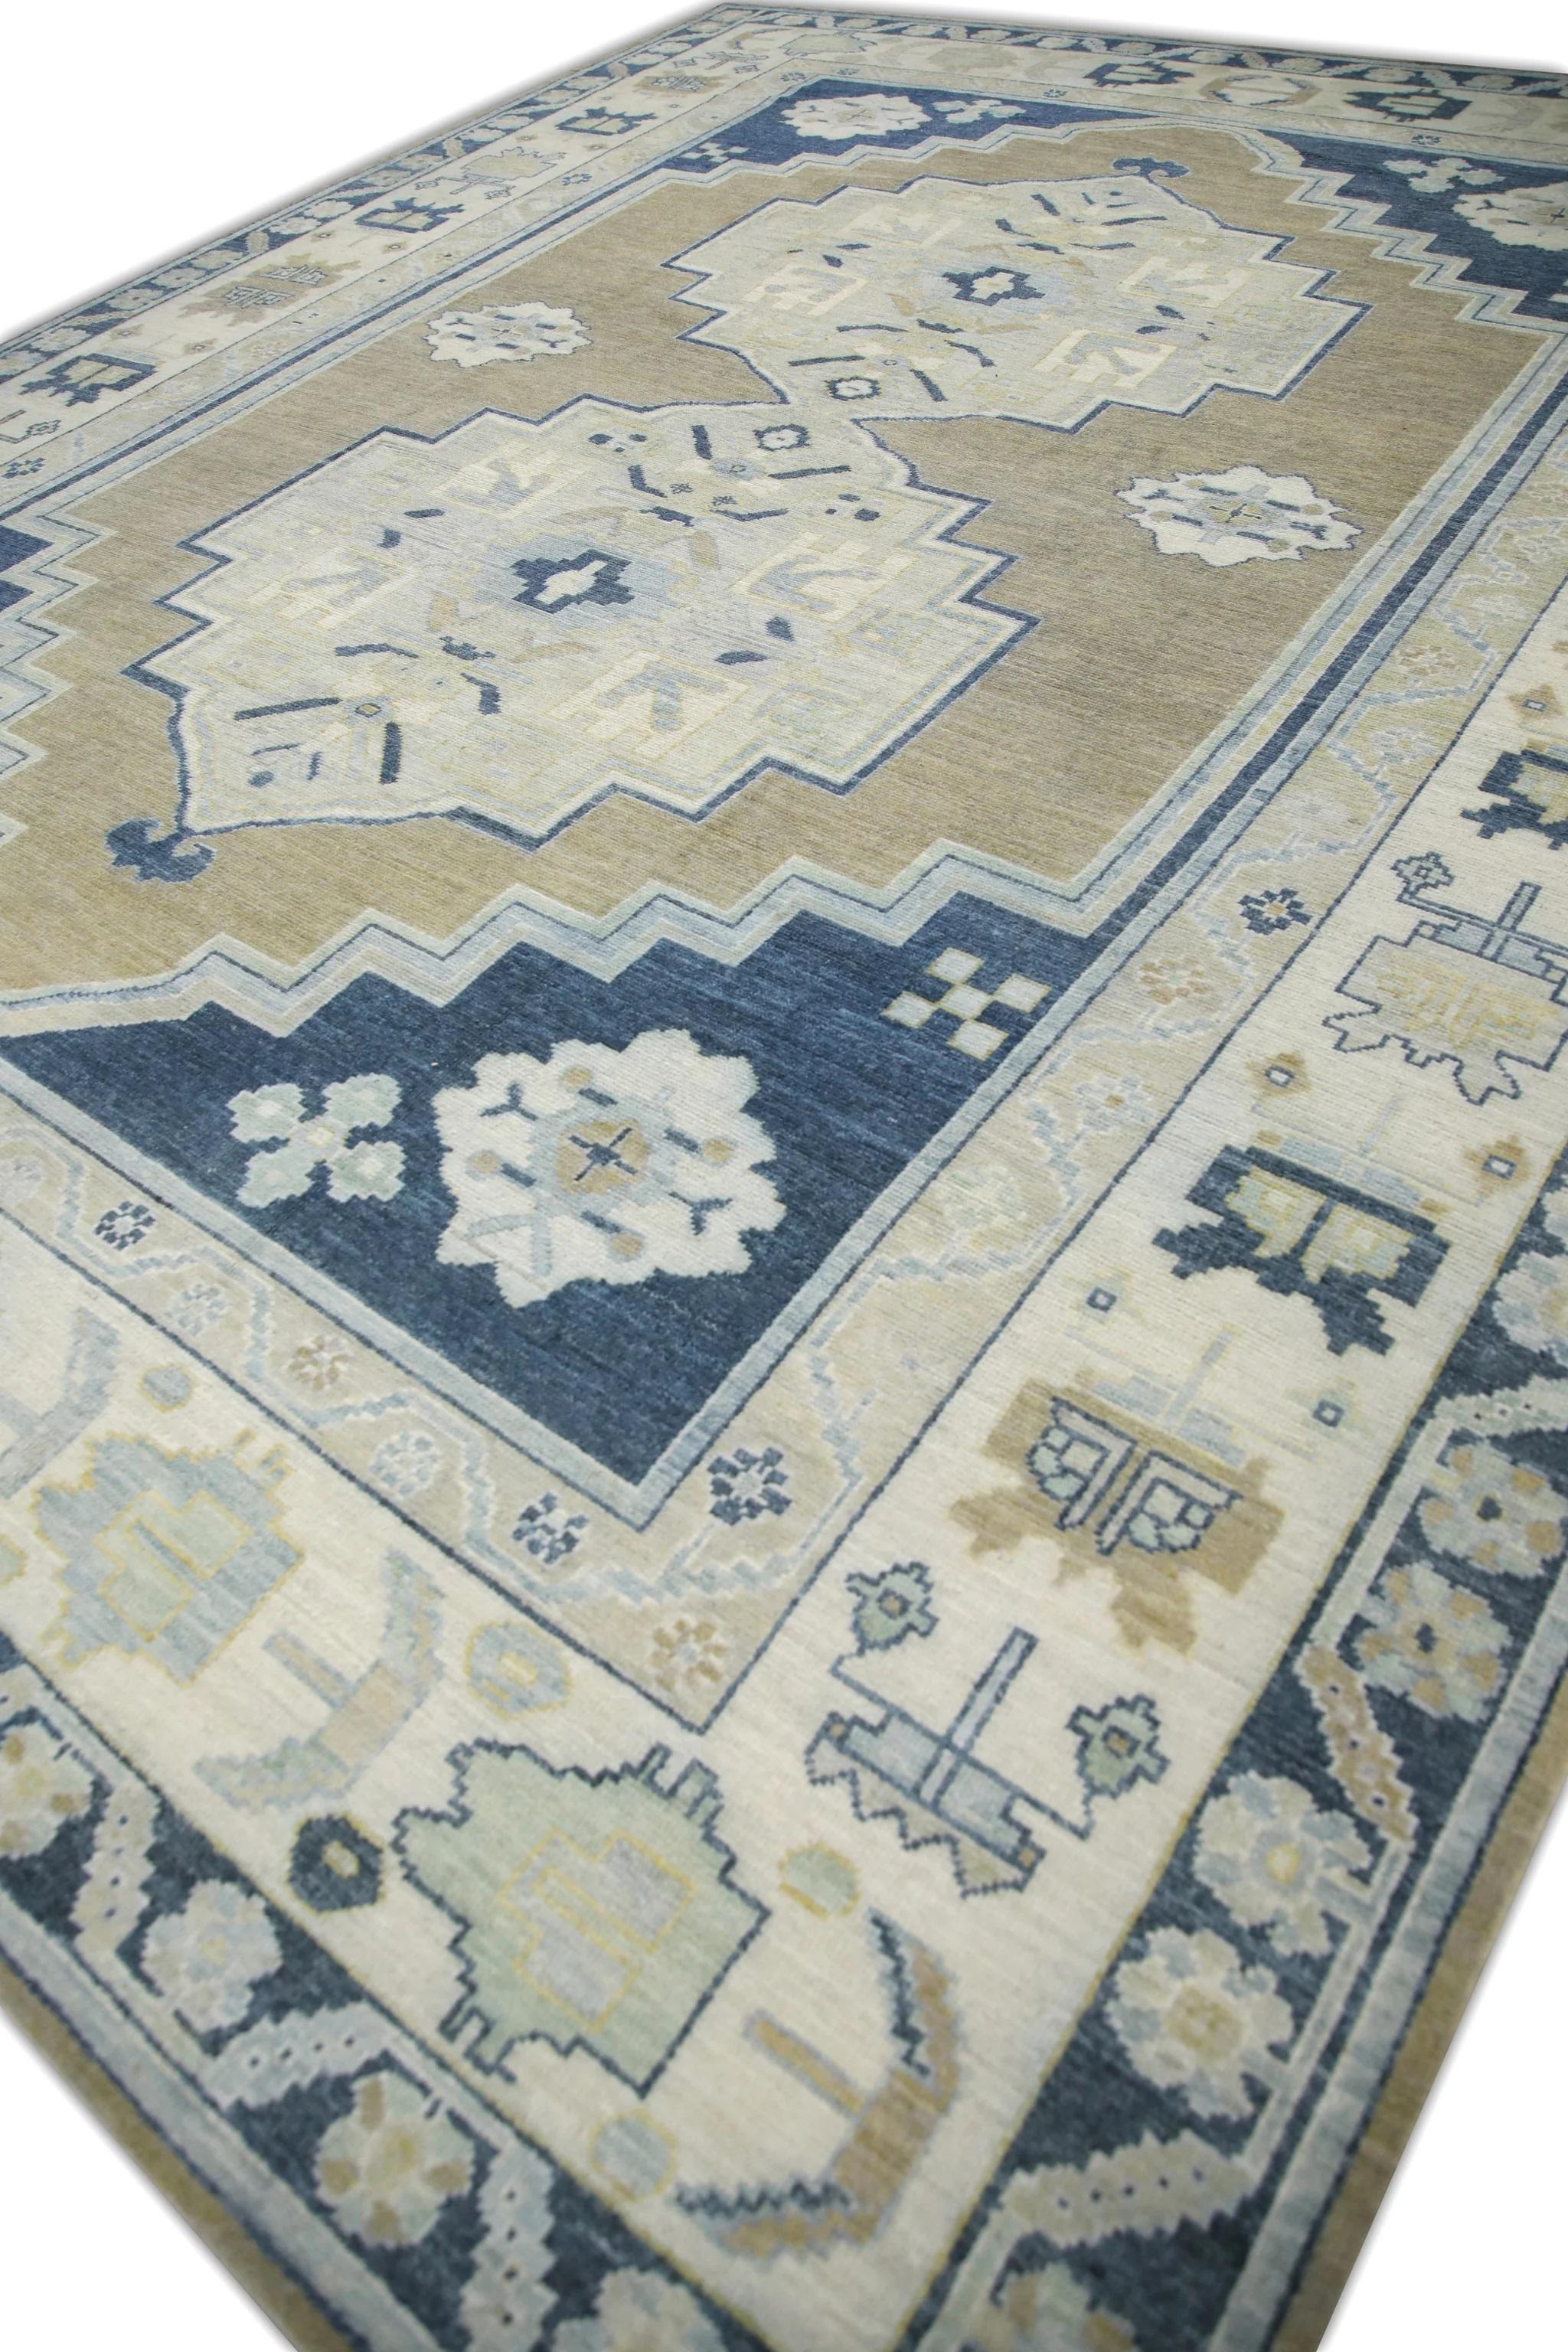 This modern oversized fine-woven Turkish Oushak rug is a stunning piece of art that has been handwoven using traditional techniques by skilled artisans. The rug features intricate patterns and a soft color palette that is achieved through the use of